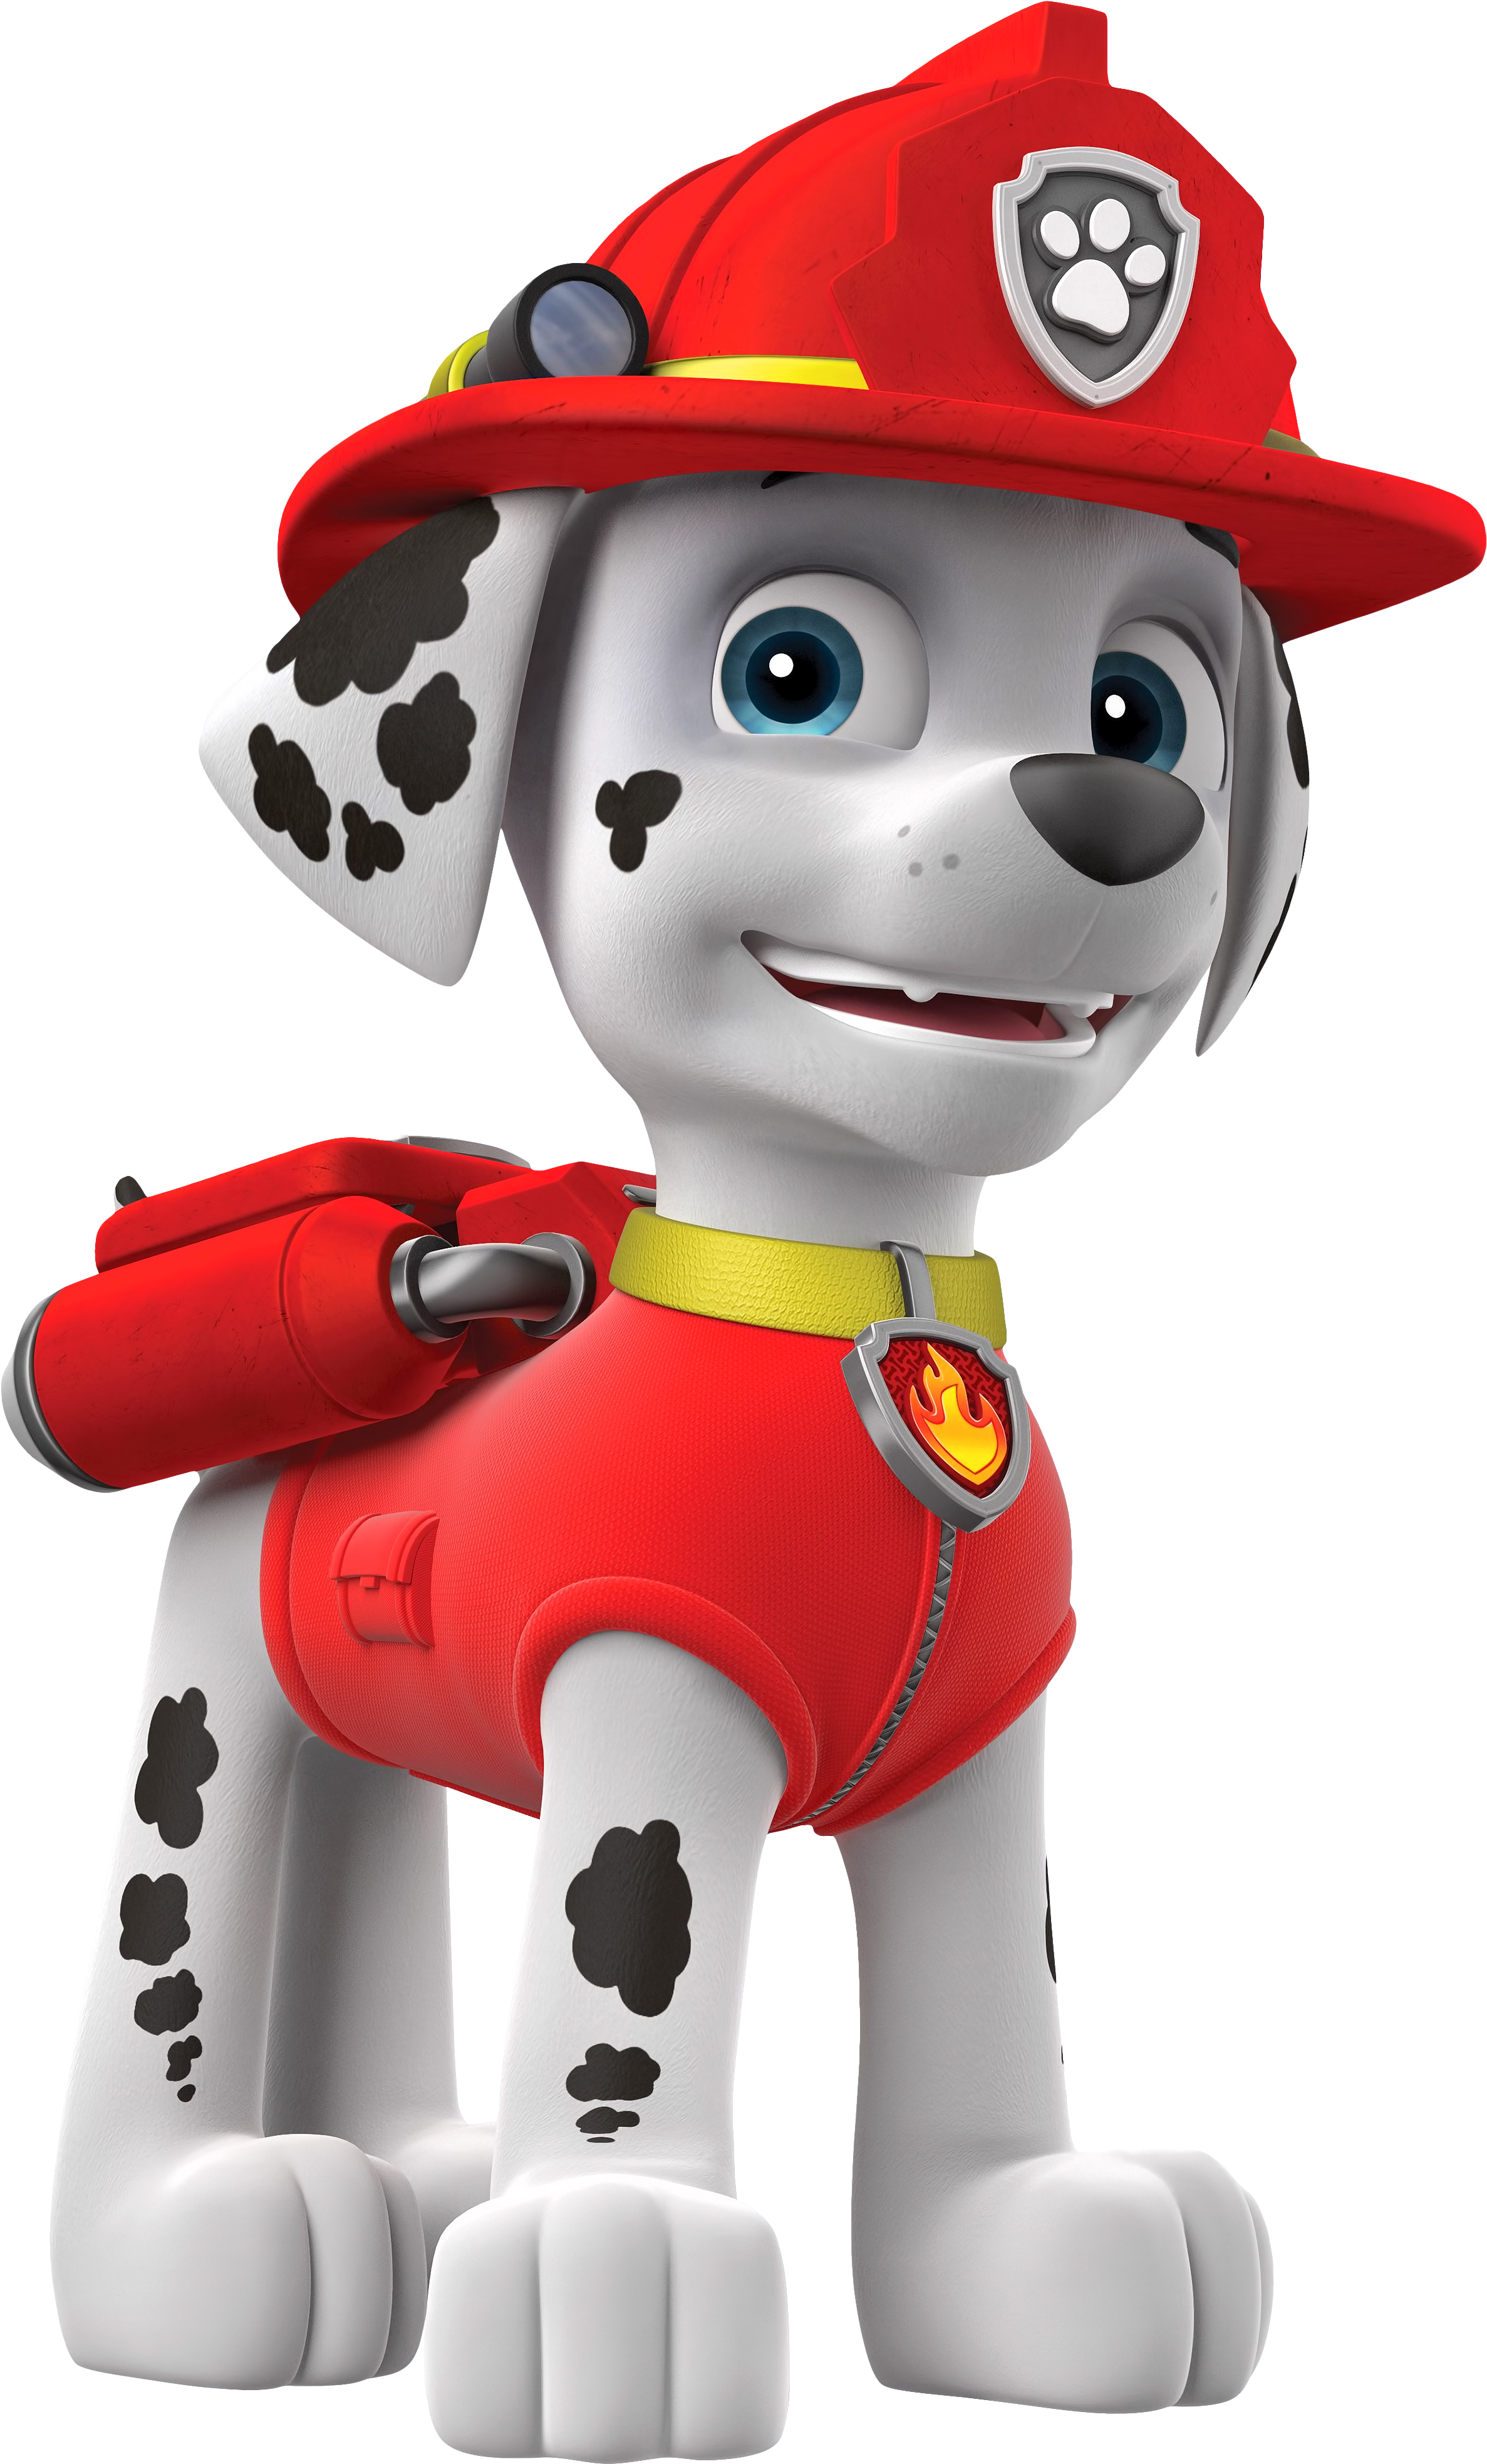 A Cartoon Dog Wearing A Red Hat And Red Vest